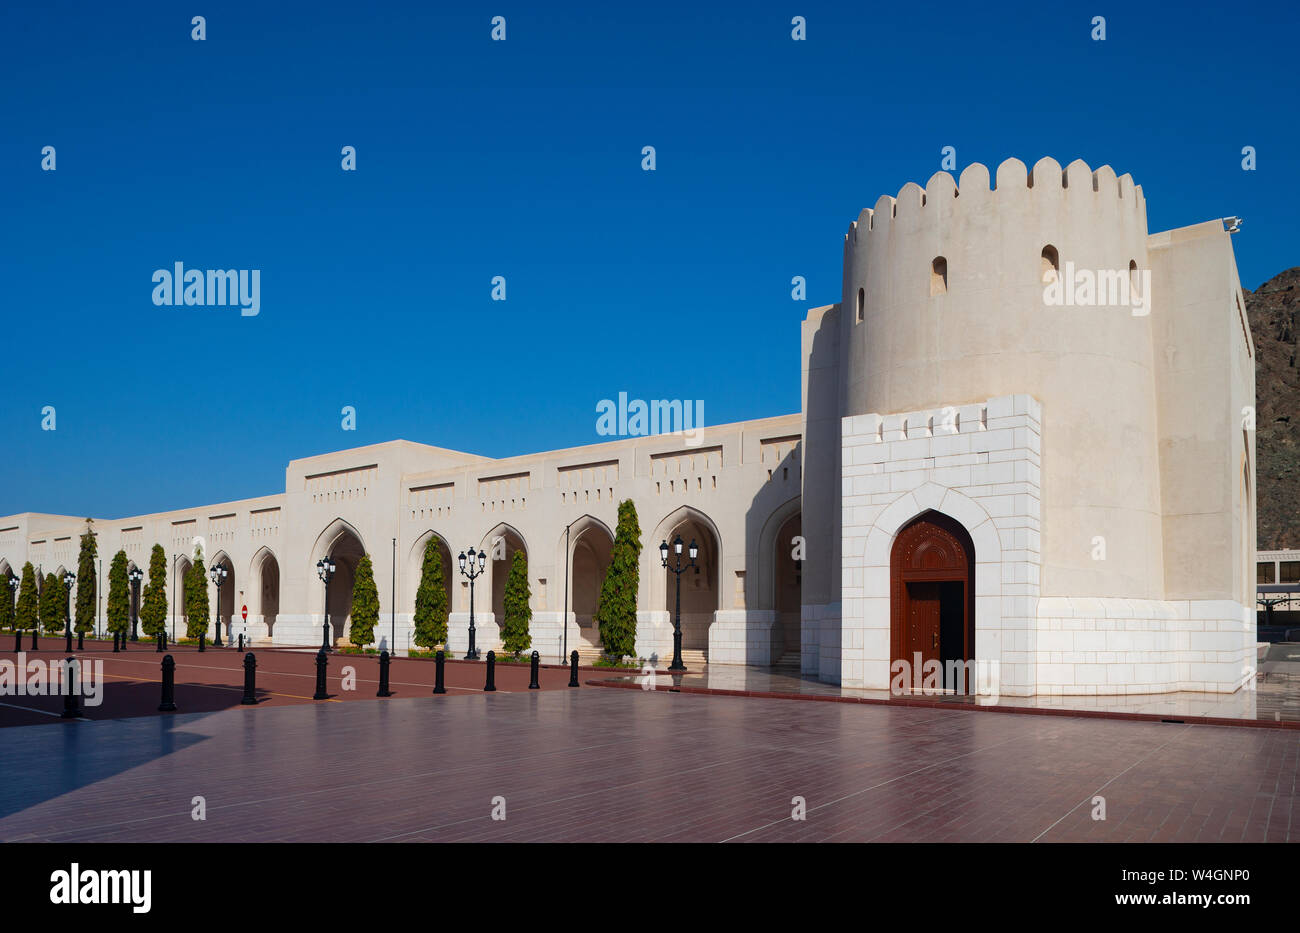 Al Alam Palace, government district, Muscat, Oman Stock Photo